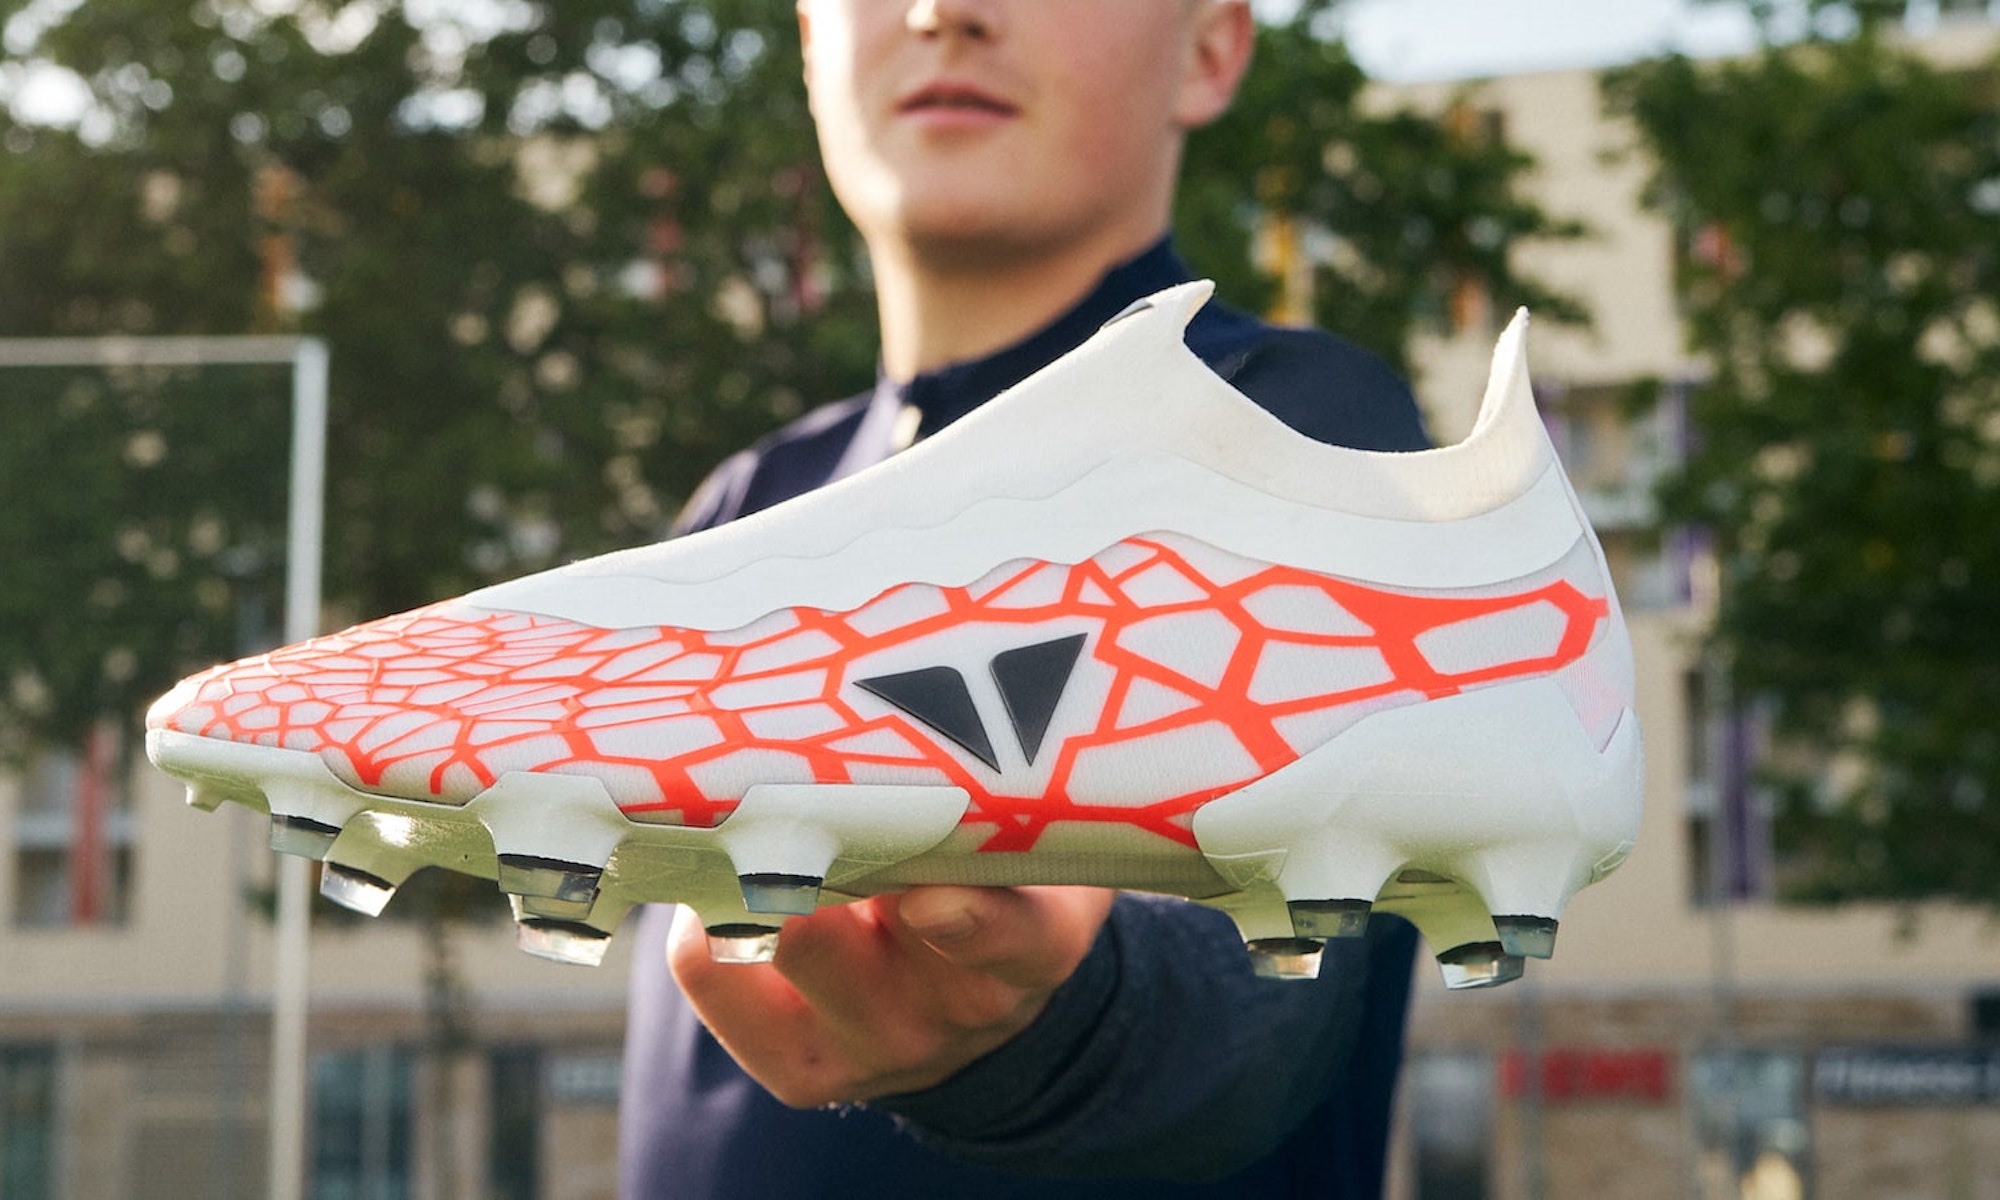 Review: These customized soccer shoes offer an ideal fit